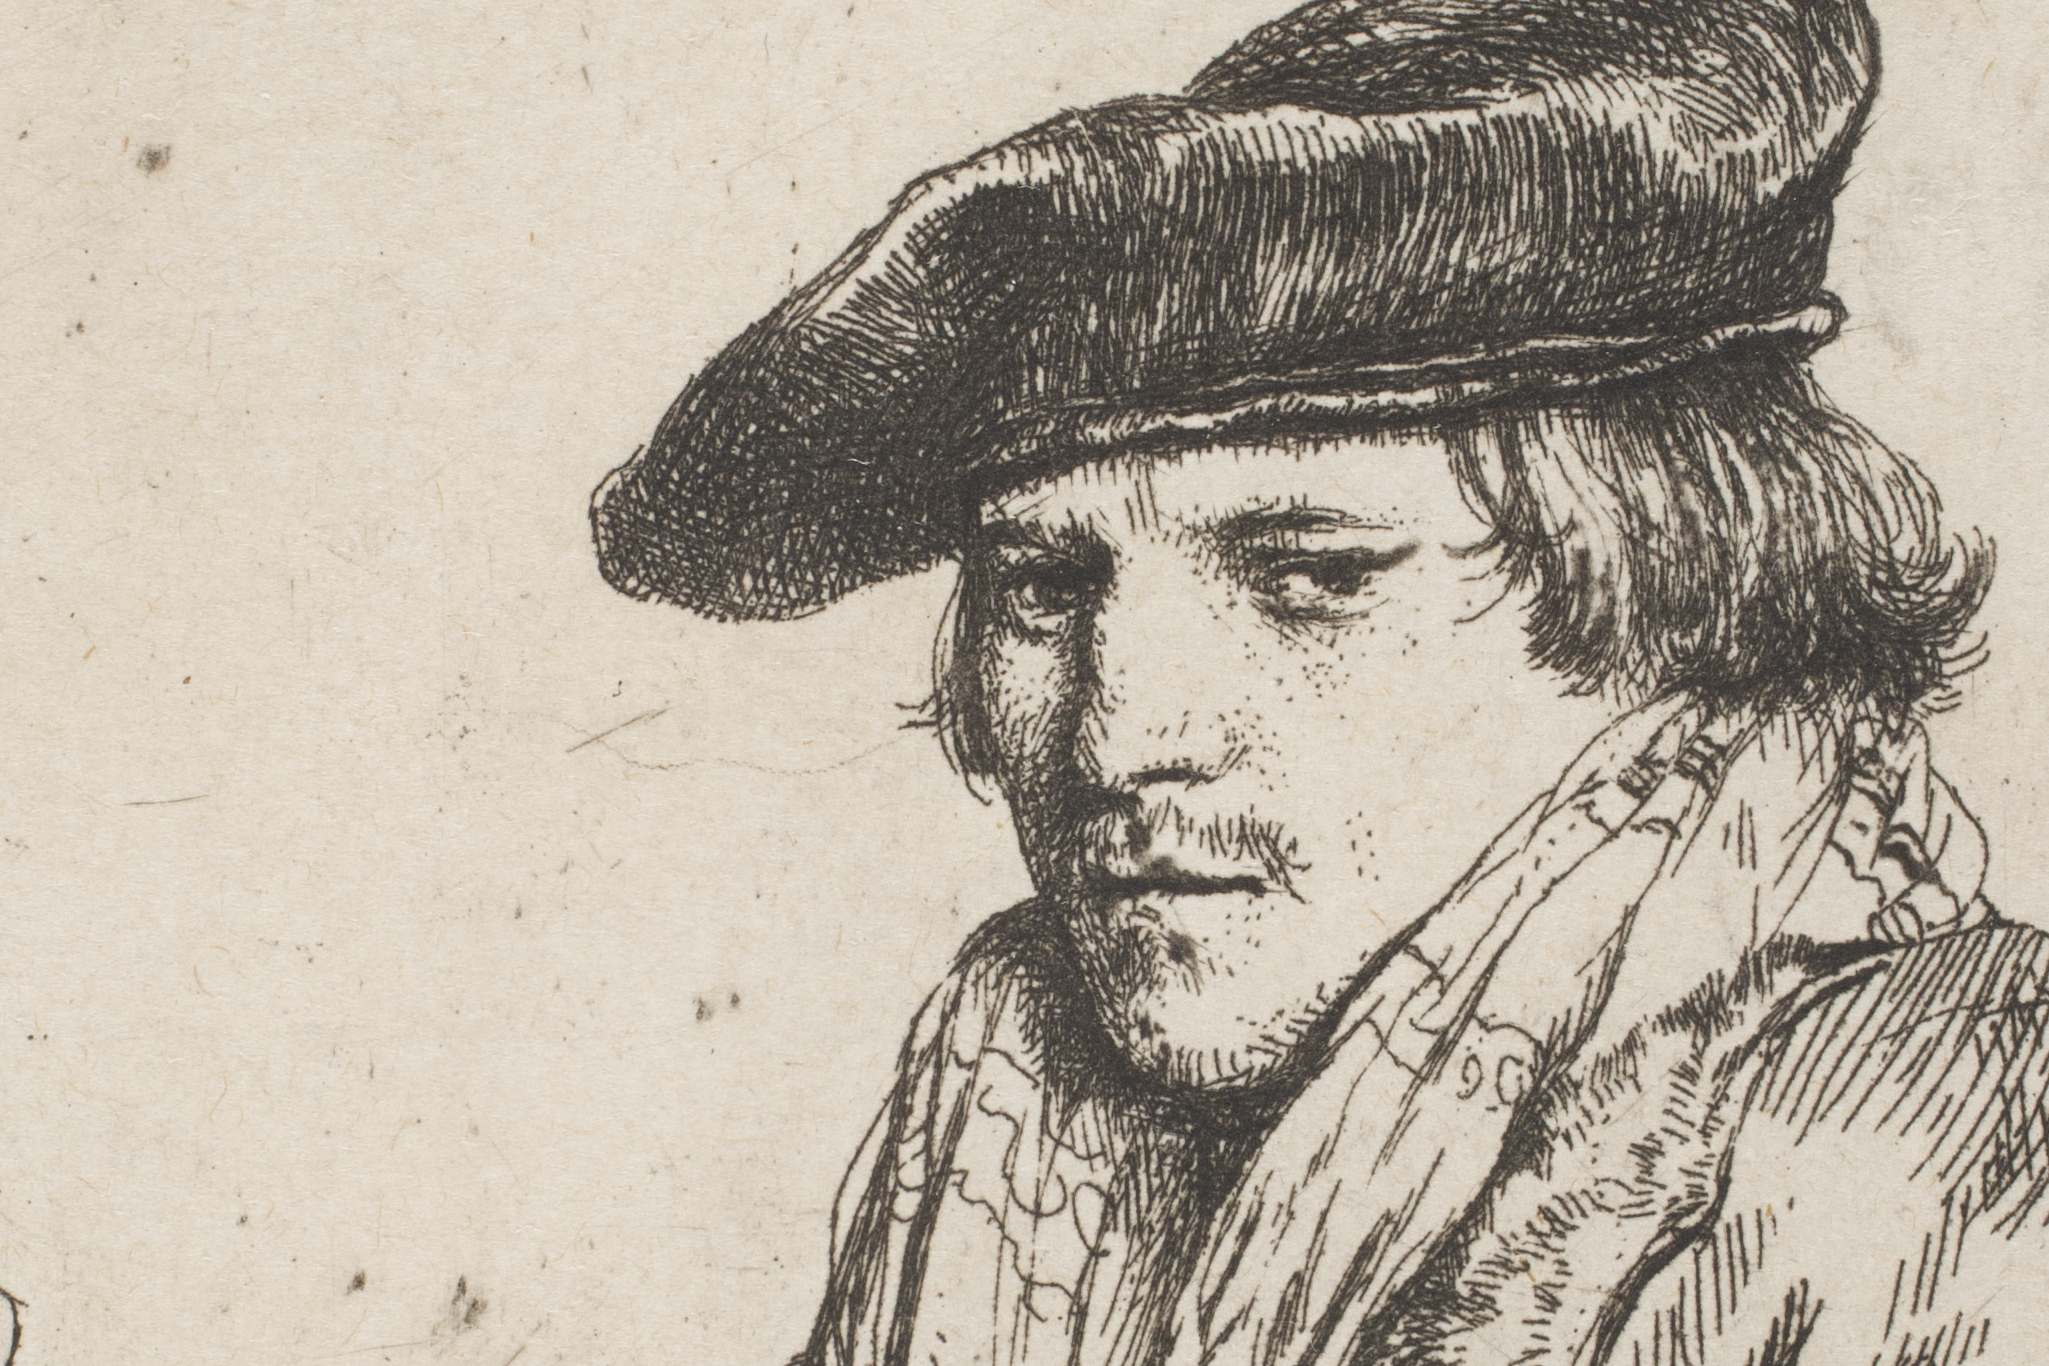 Rembrandt van Rijn, 'A Young Man In A Velvet Cap', detail, 1637, etching on cream laid paper